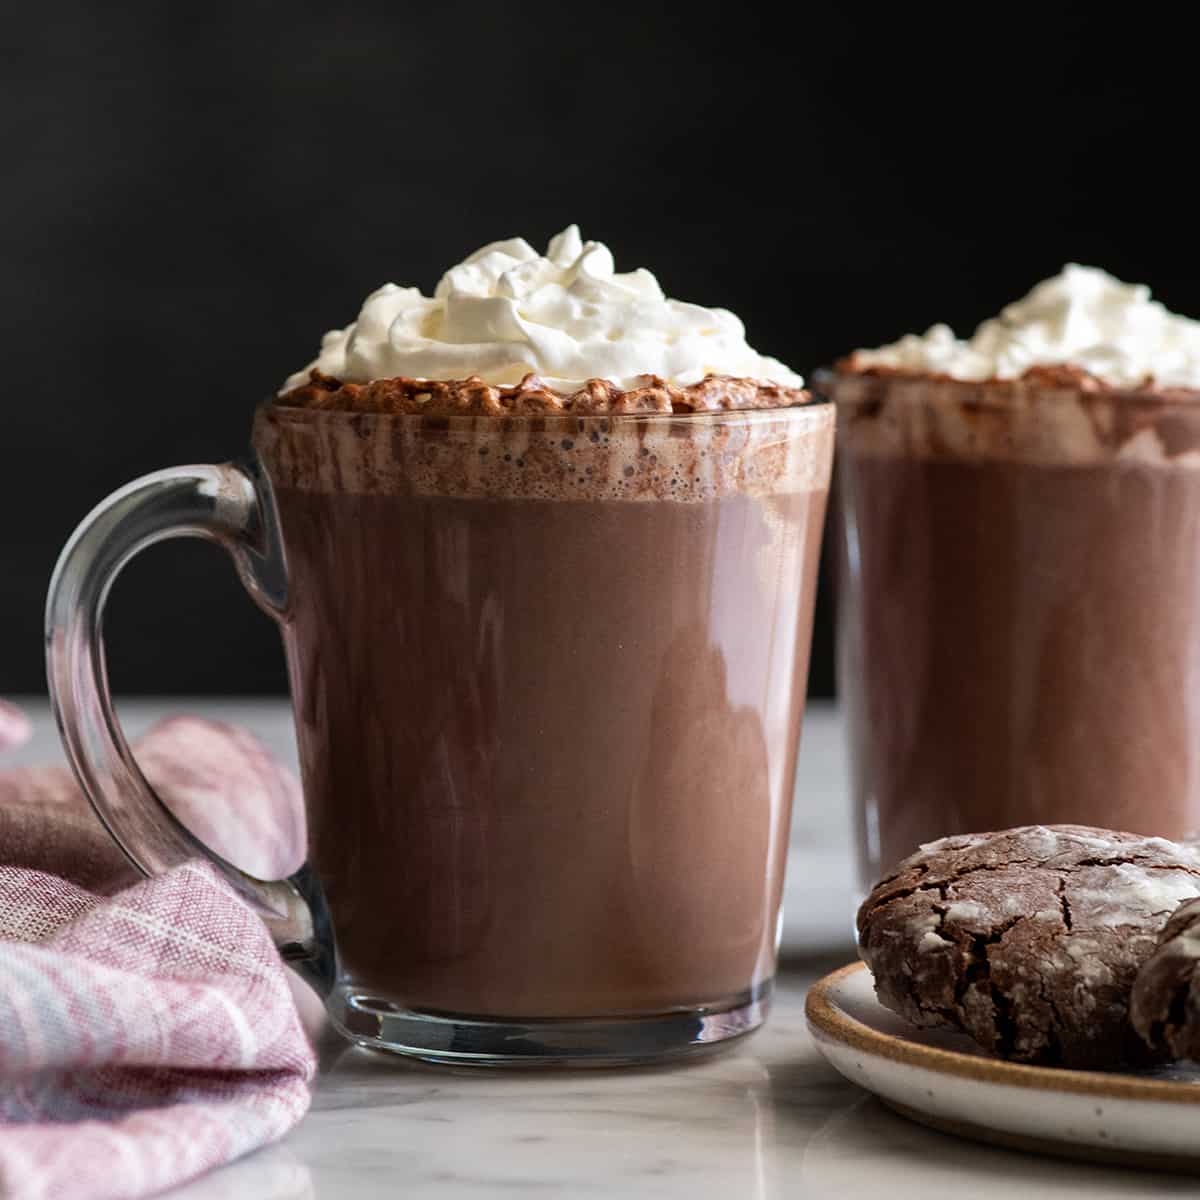 front photo of a glass mug of homemade hot chocolate with whipped cream